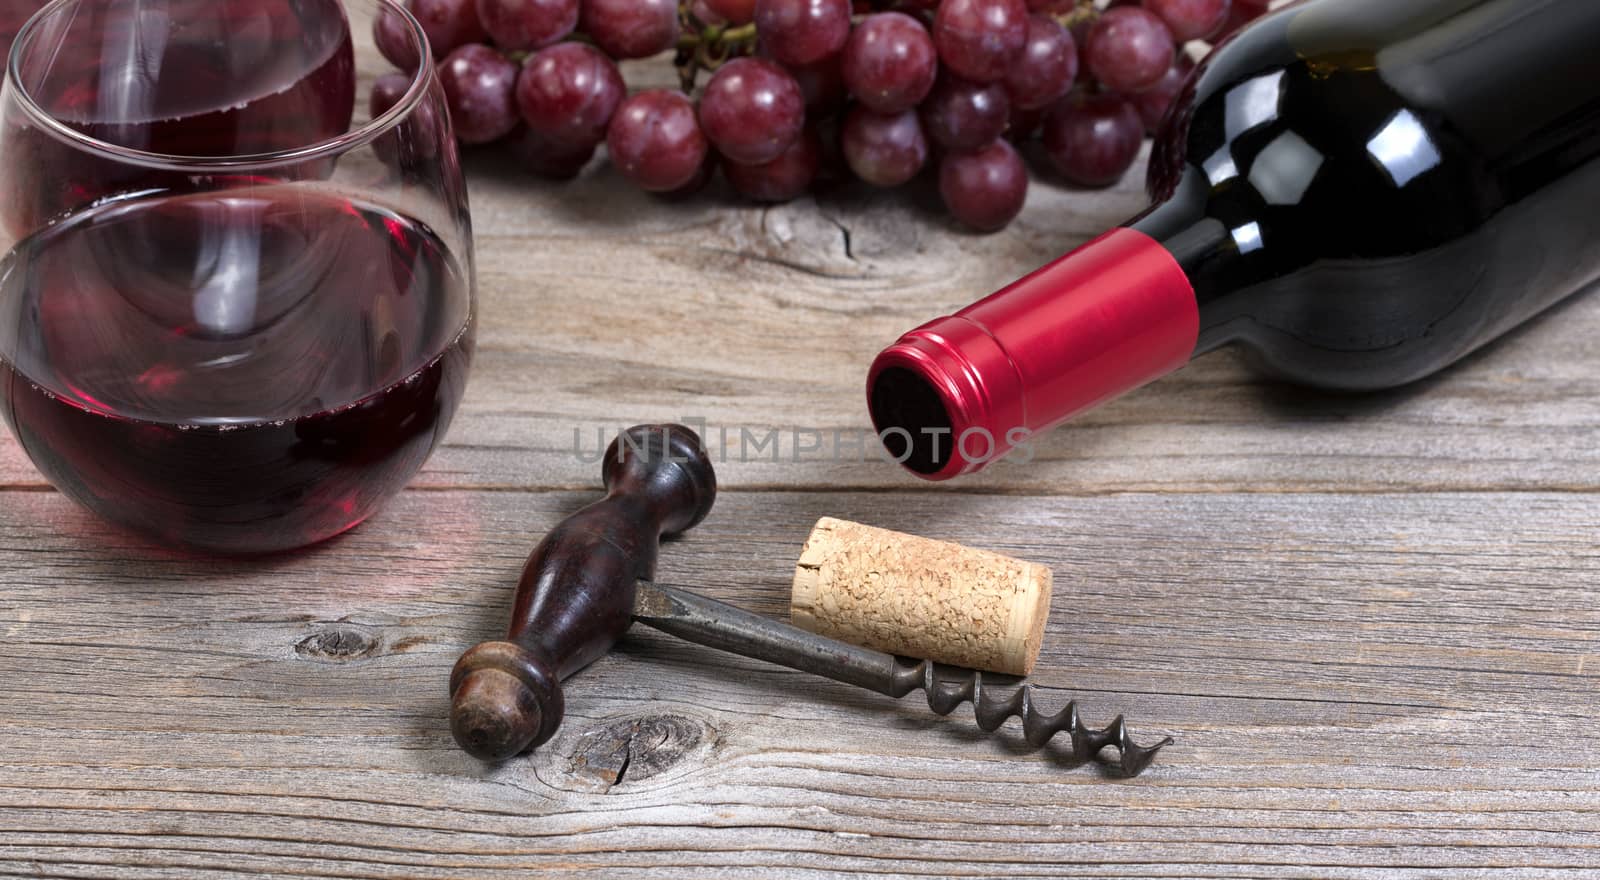 Vintage corkscrew with red wine bottle with grapes and glasses i by tab1962